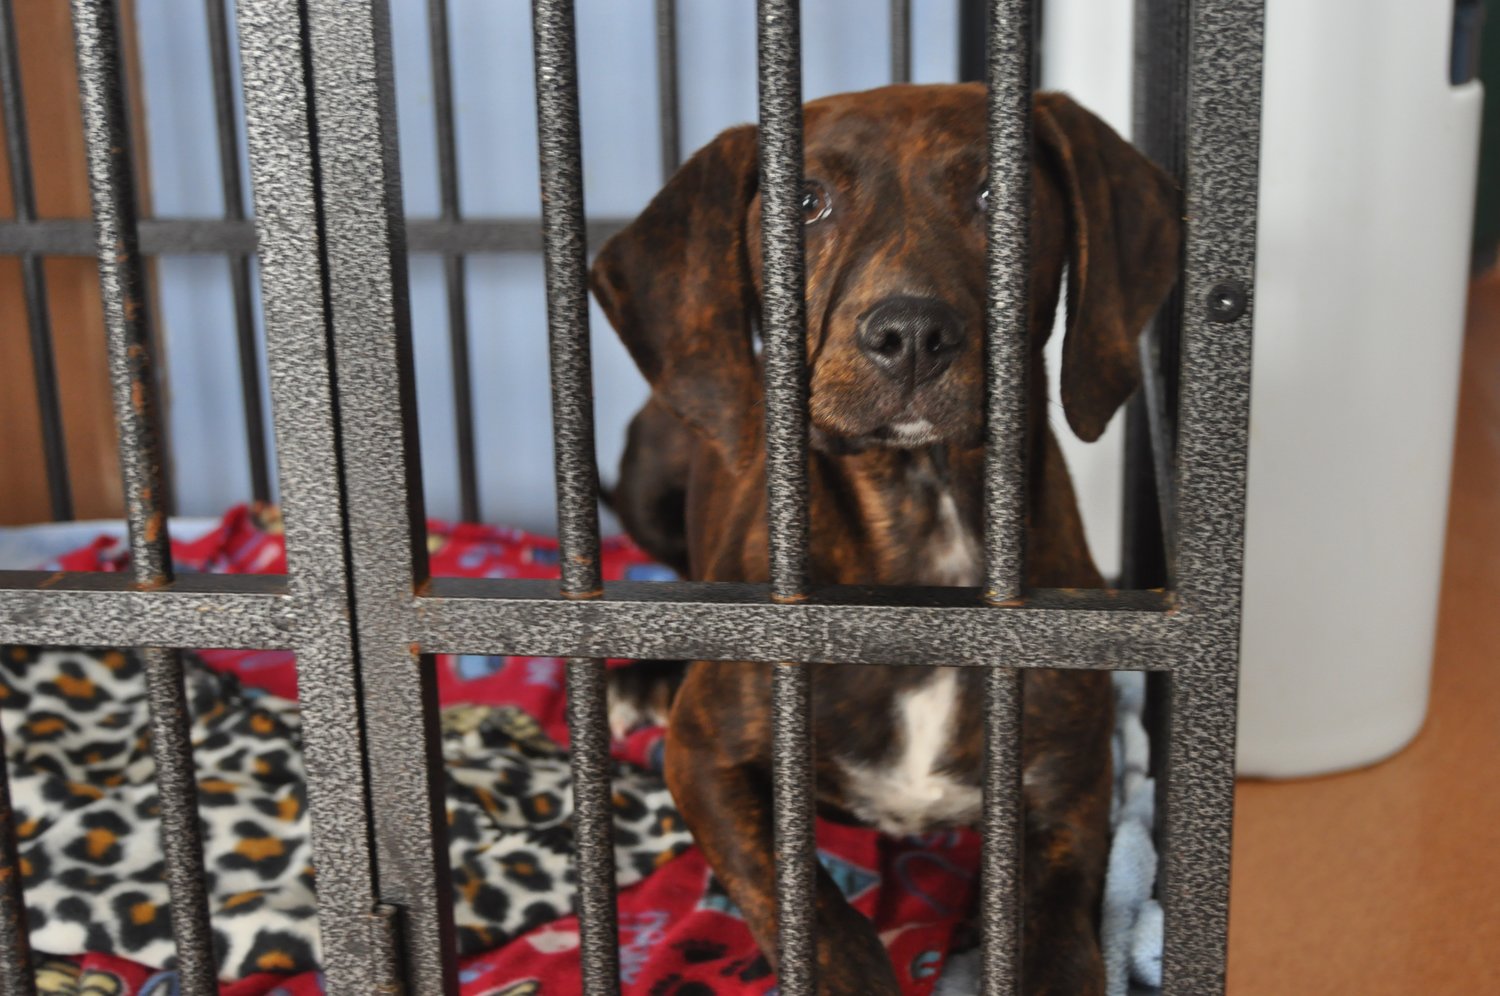 One of the dogs available for adoption sits in a crate Monday at the Animal Welfare League of Montgomery County.